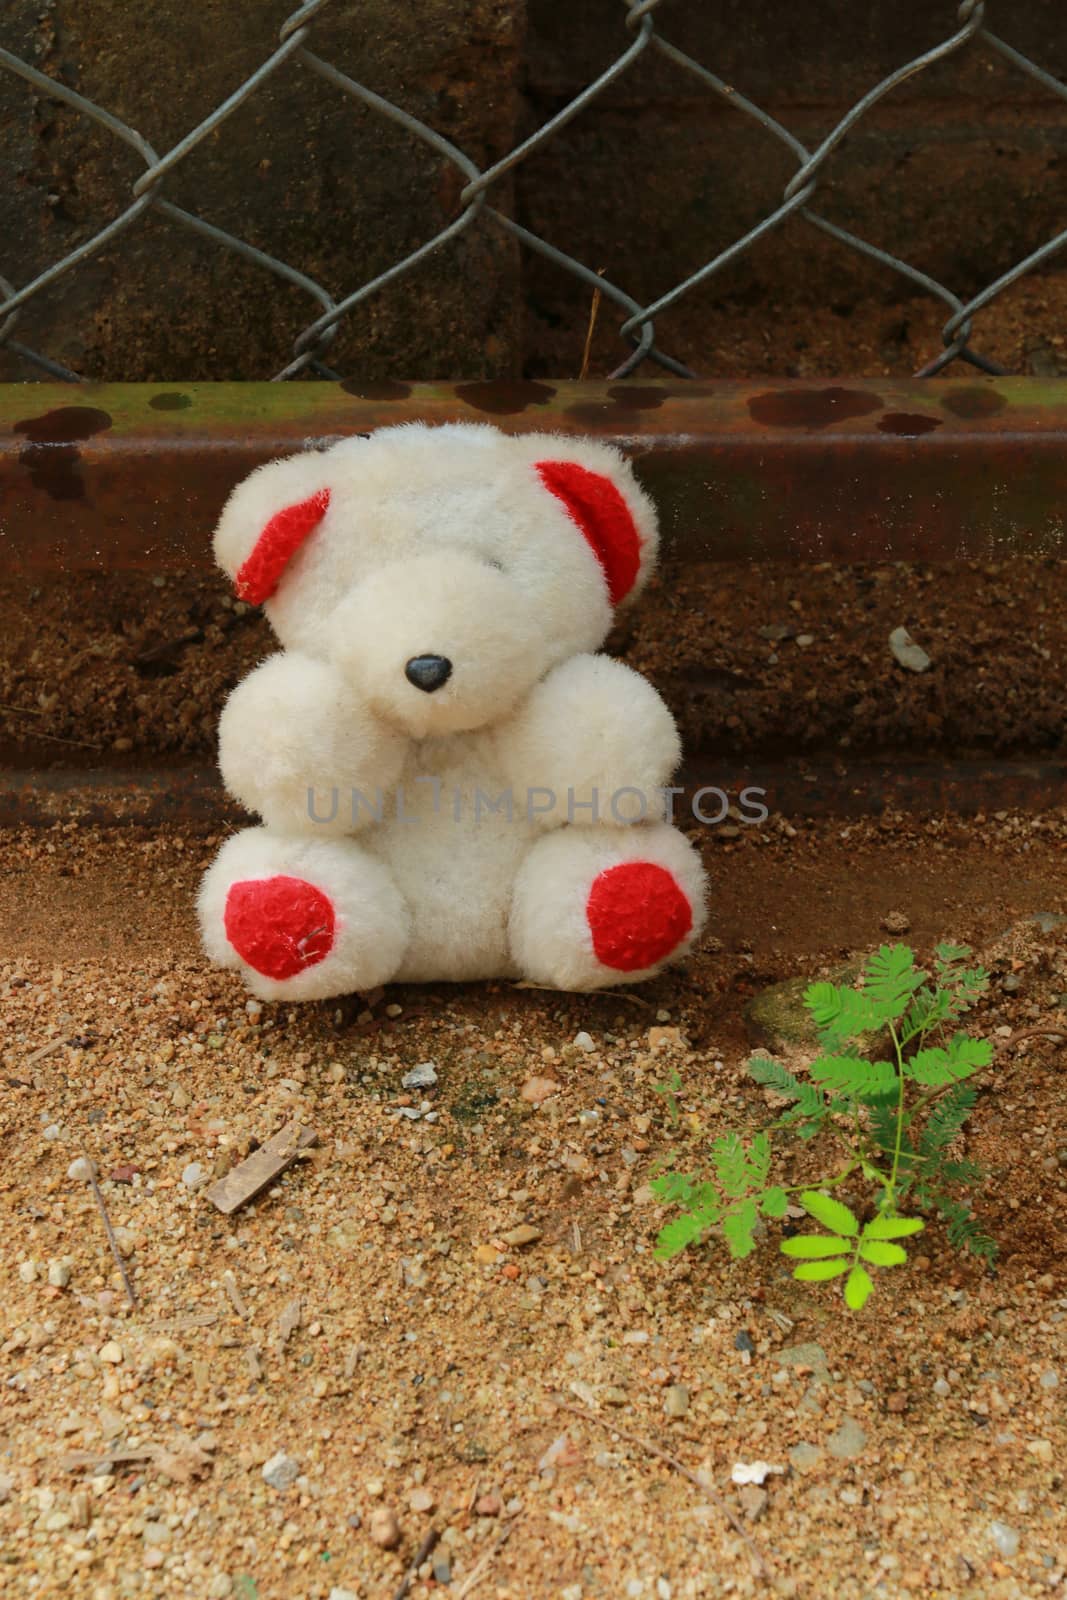 The doll is placed at the fence near the green plant.